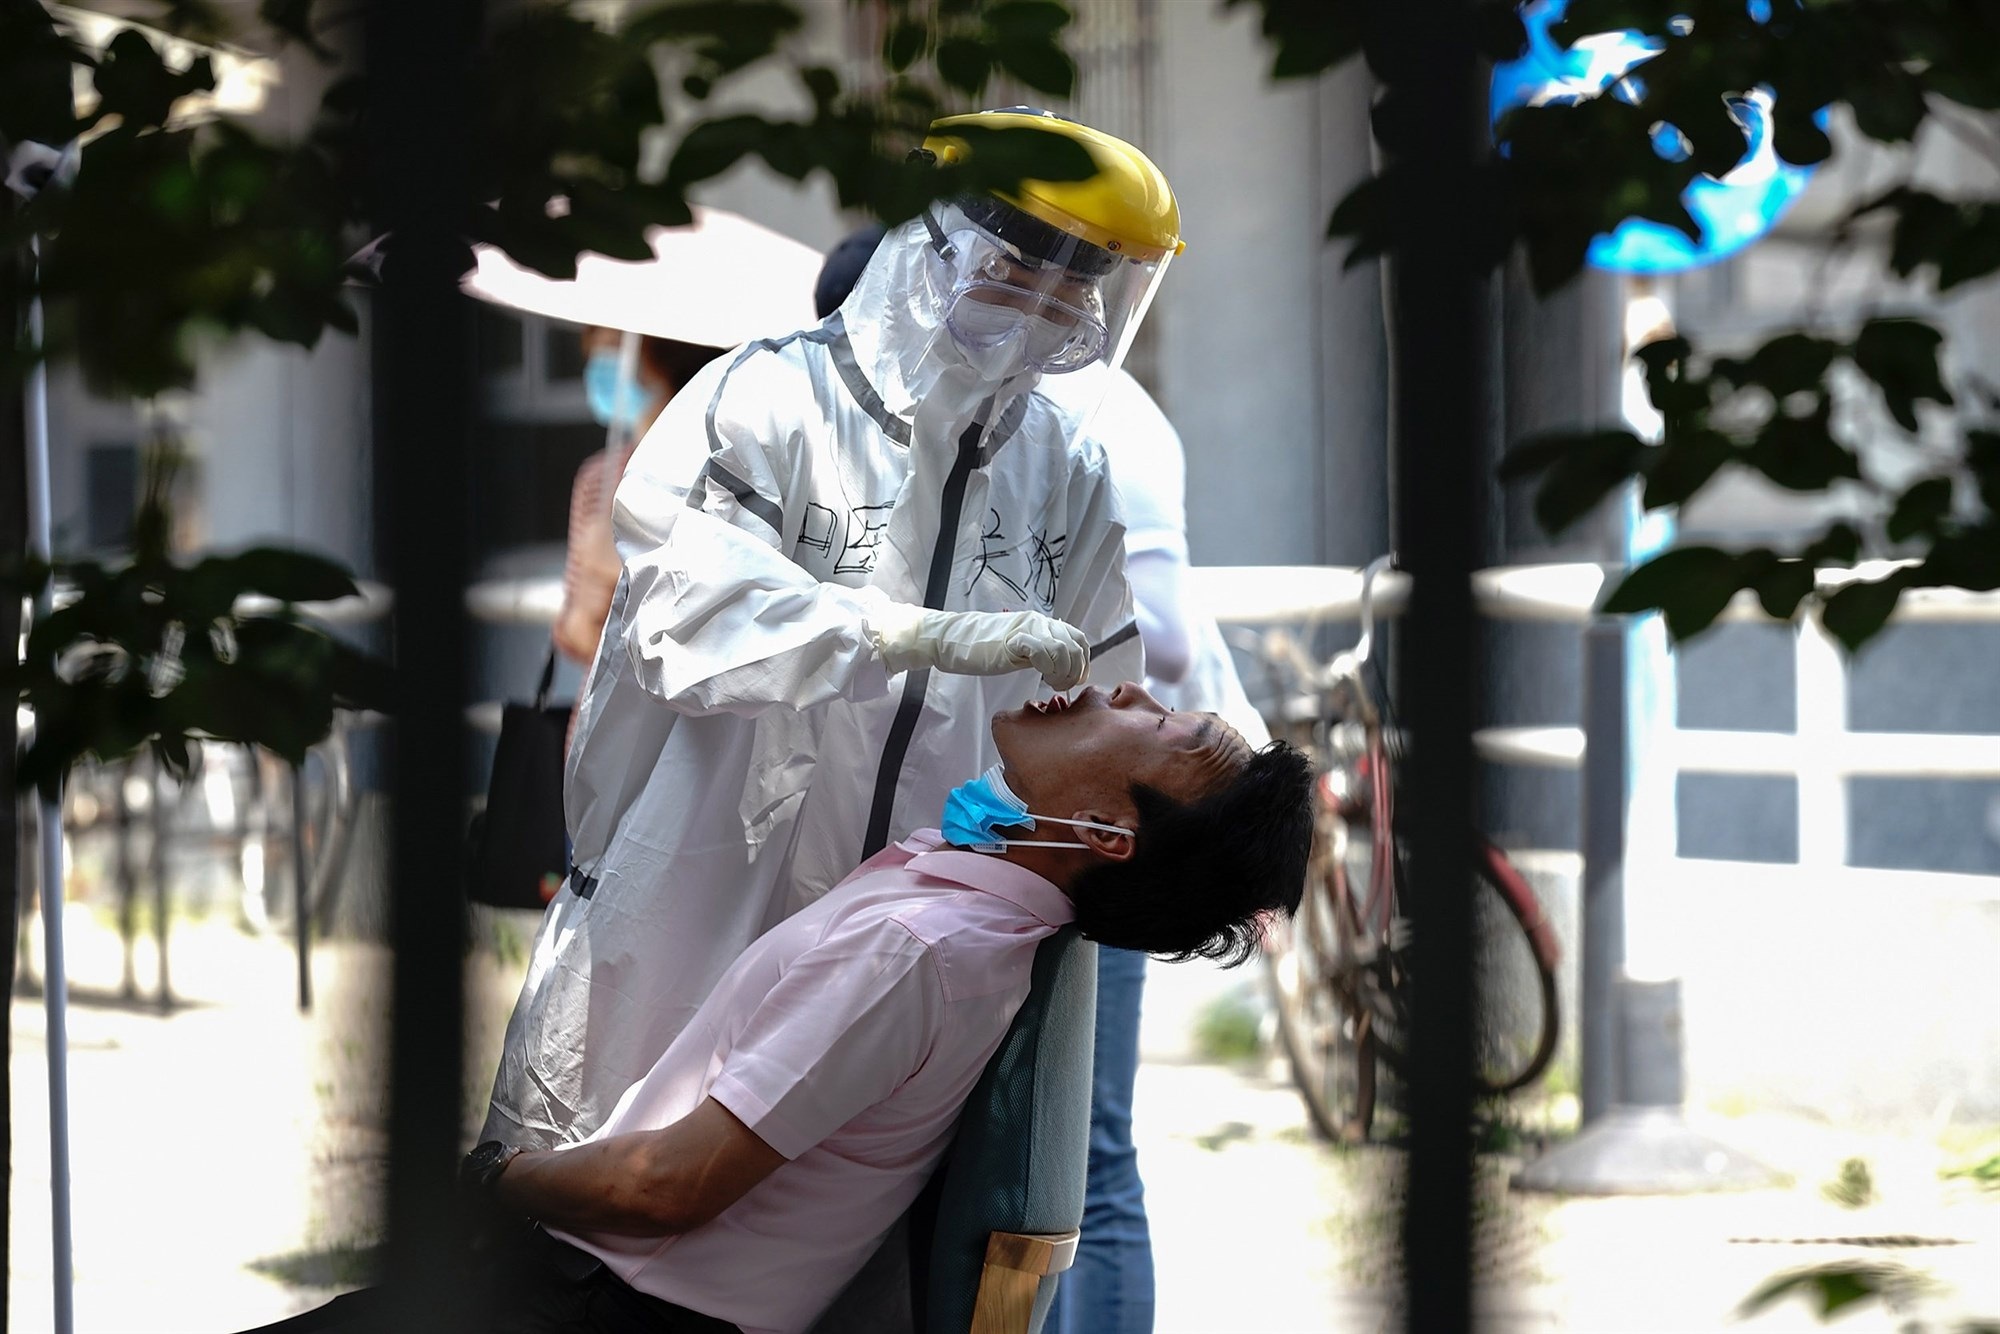 A nurse wearing a protective suit and mask takes a nucleic acid test for COVID 19 from a person who either visited or lives near the Xinfadi market in Beijing